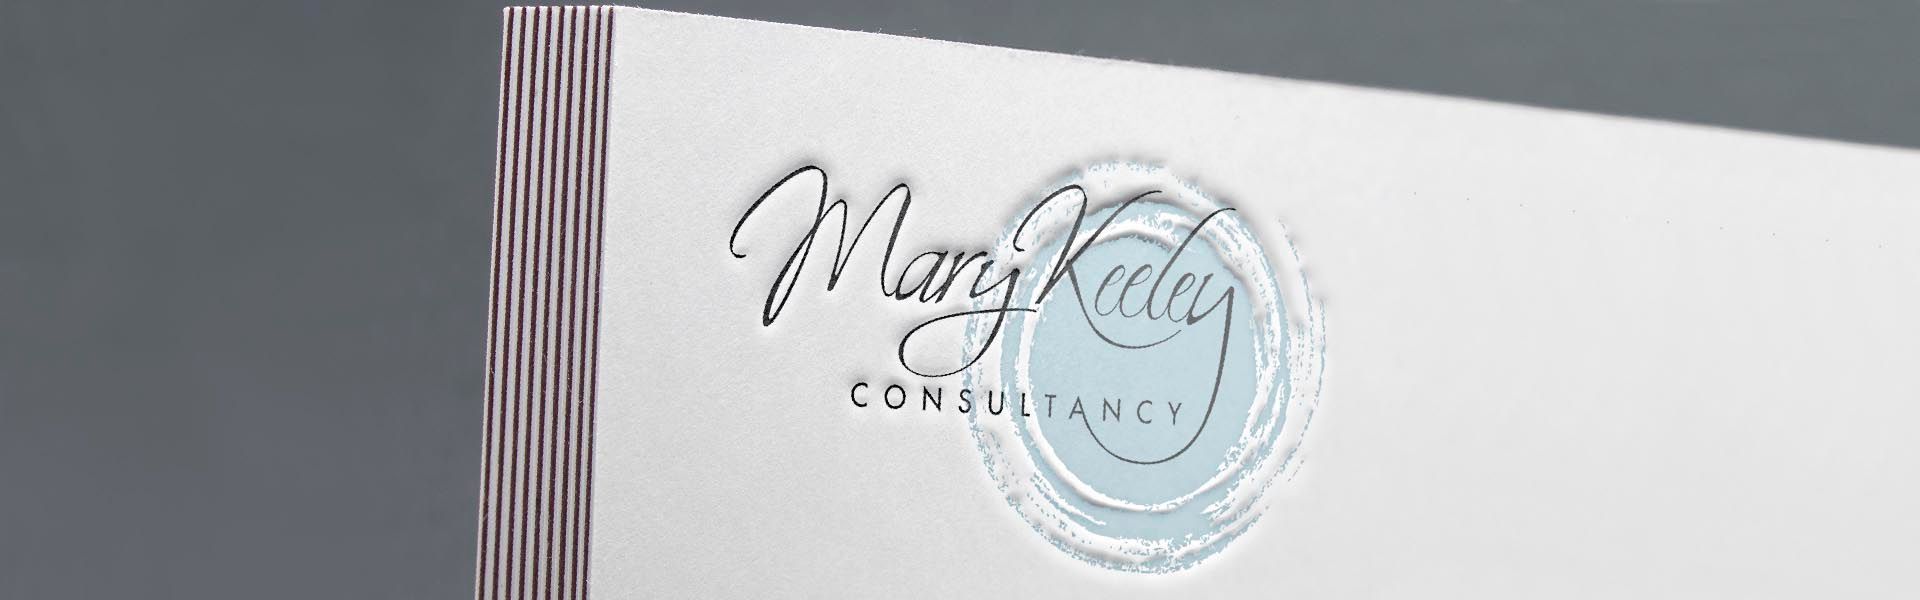 a logo for mary keeley consultancy is on a piece of paper